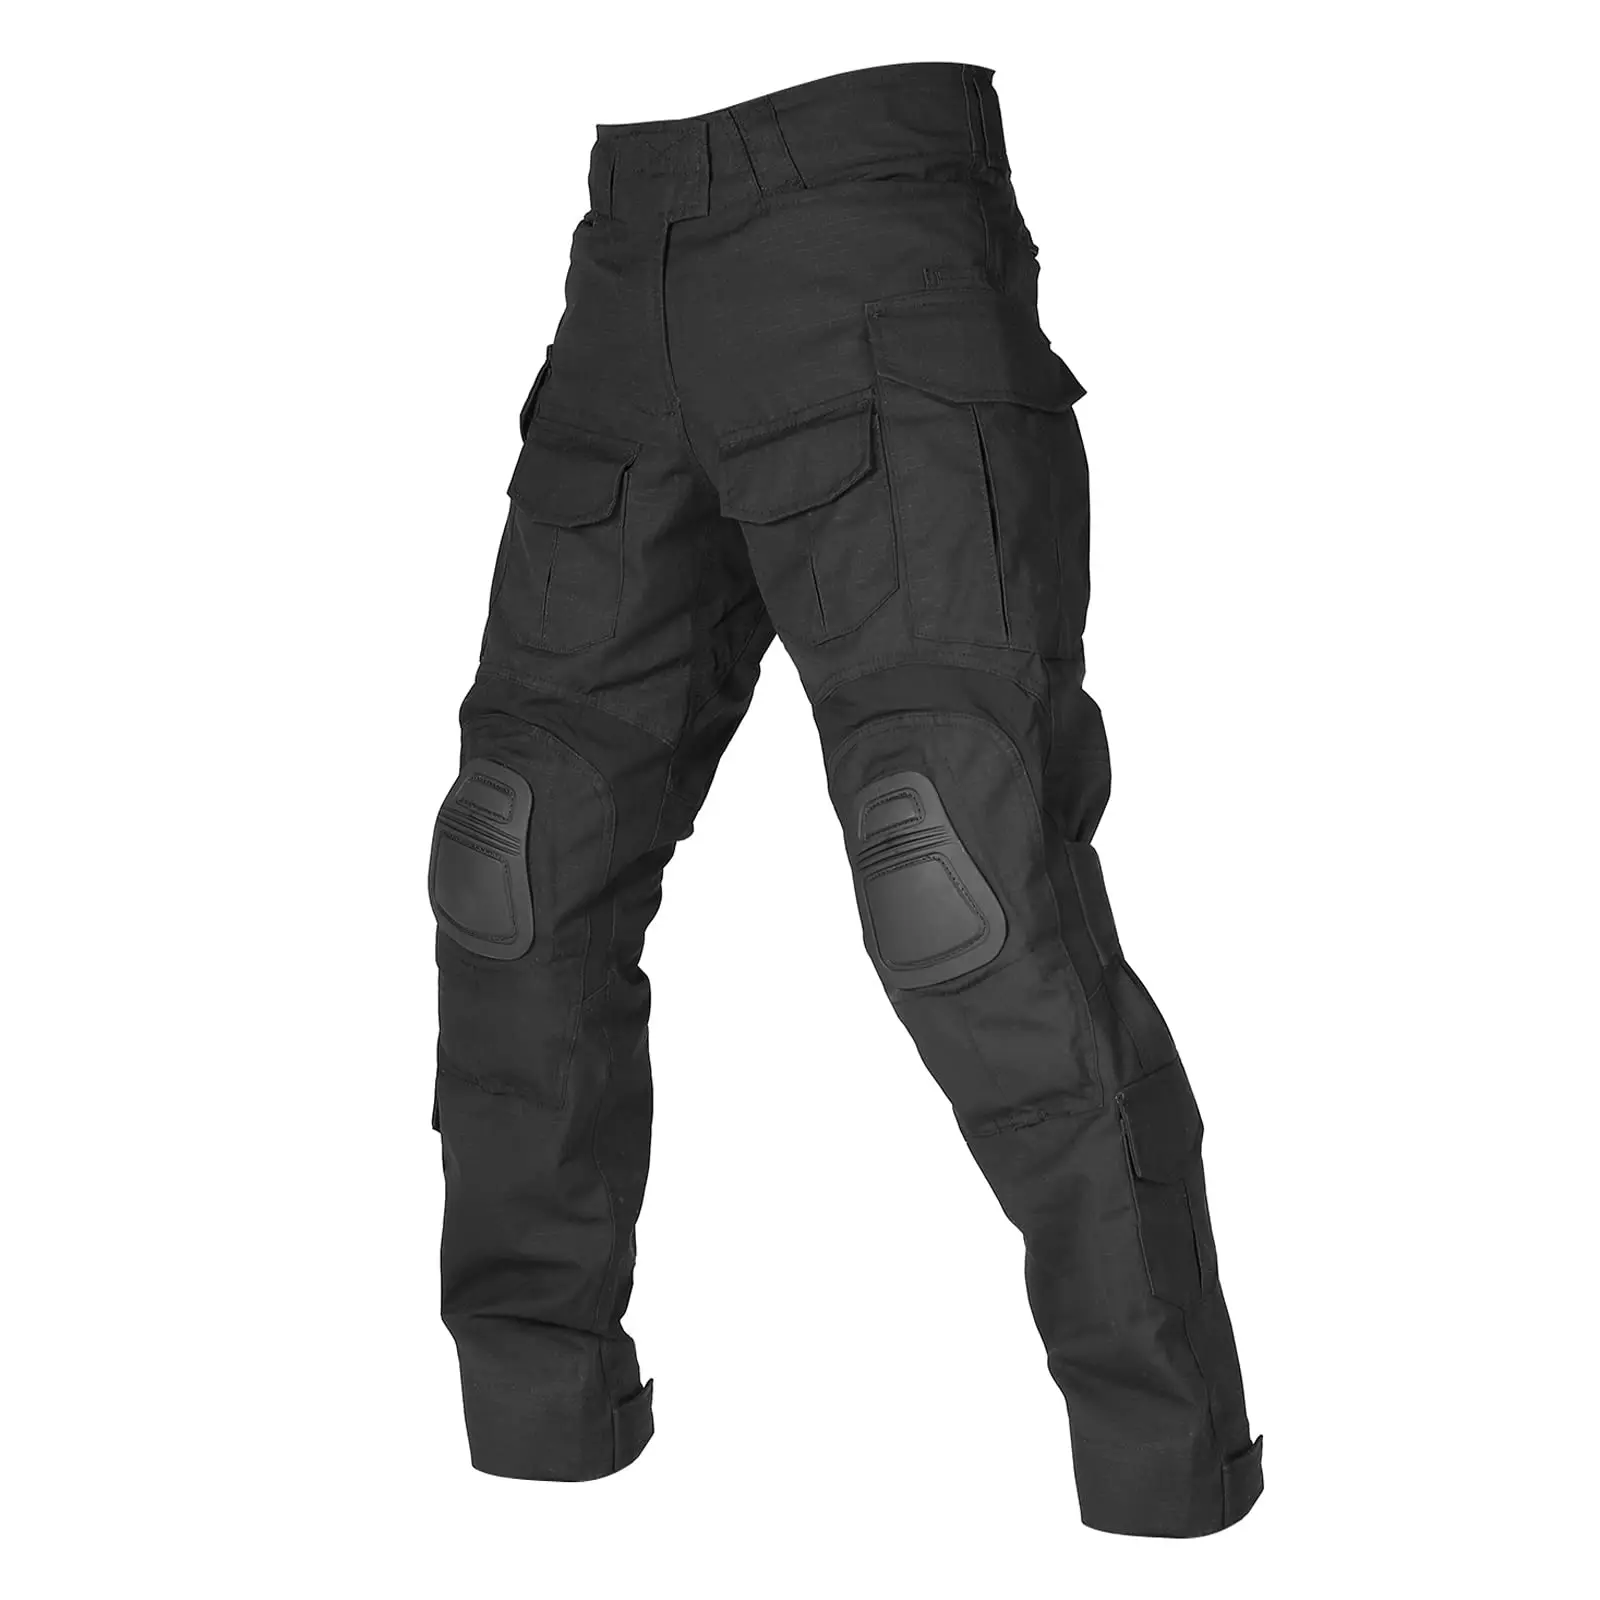 

Votagoo G3 Combat Pants Tactical pants for men Military Airsoft Hunting Knee Pads Trousers Waterproof Durable